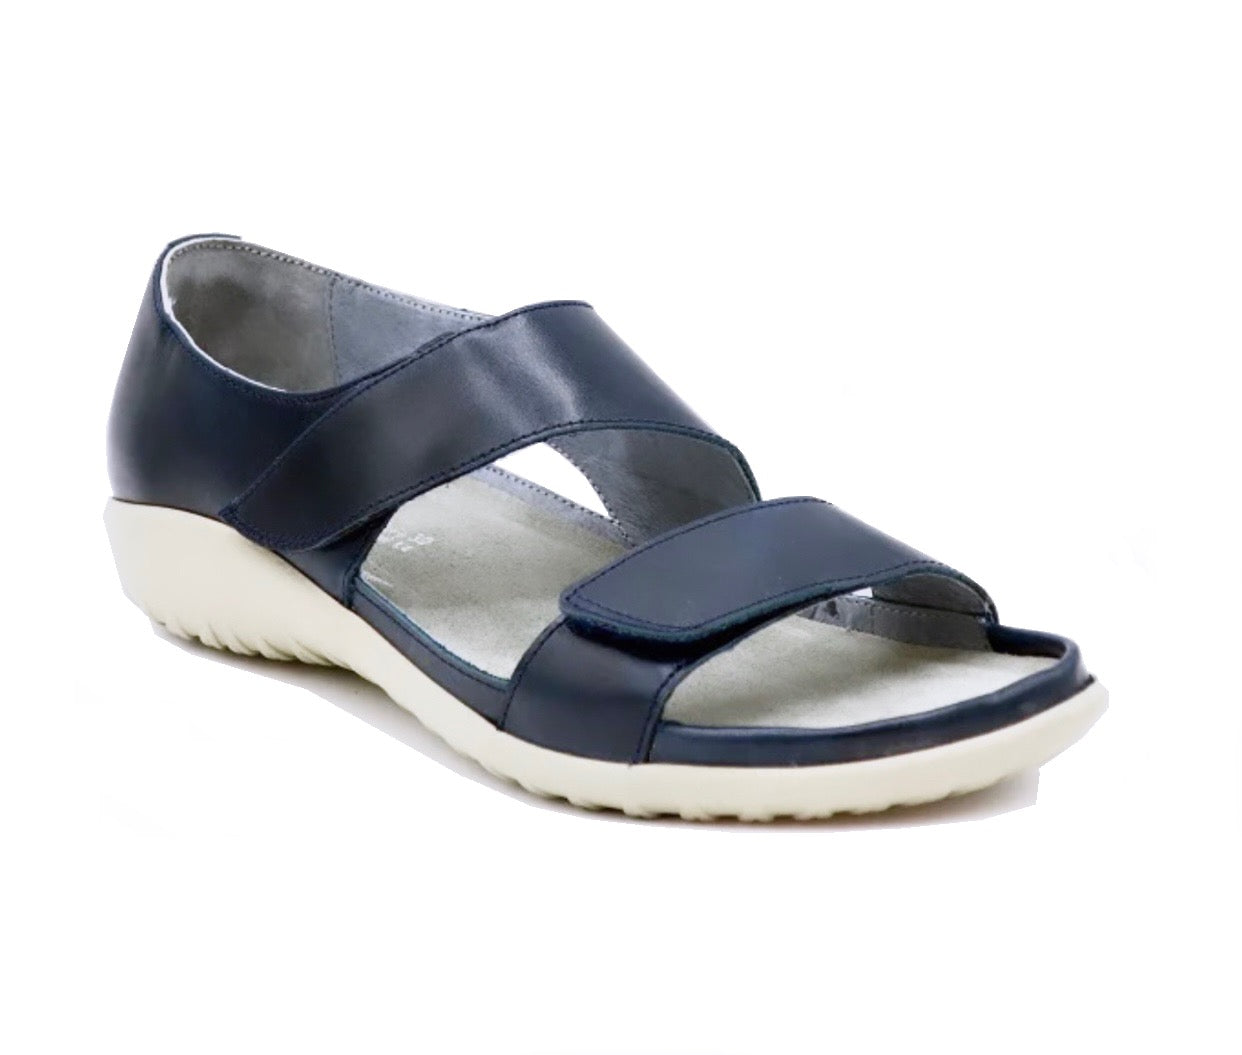 Naot Manawa Intense Blue Leather 2 Strap Velcro Sandals Made In Israel